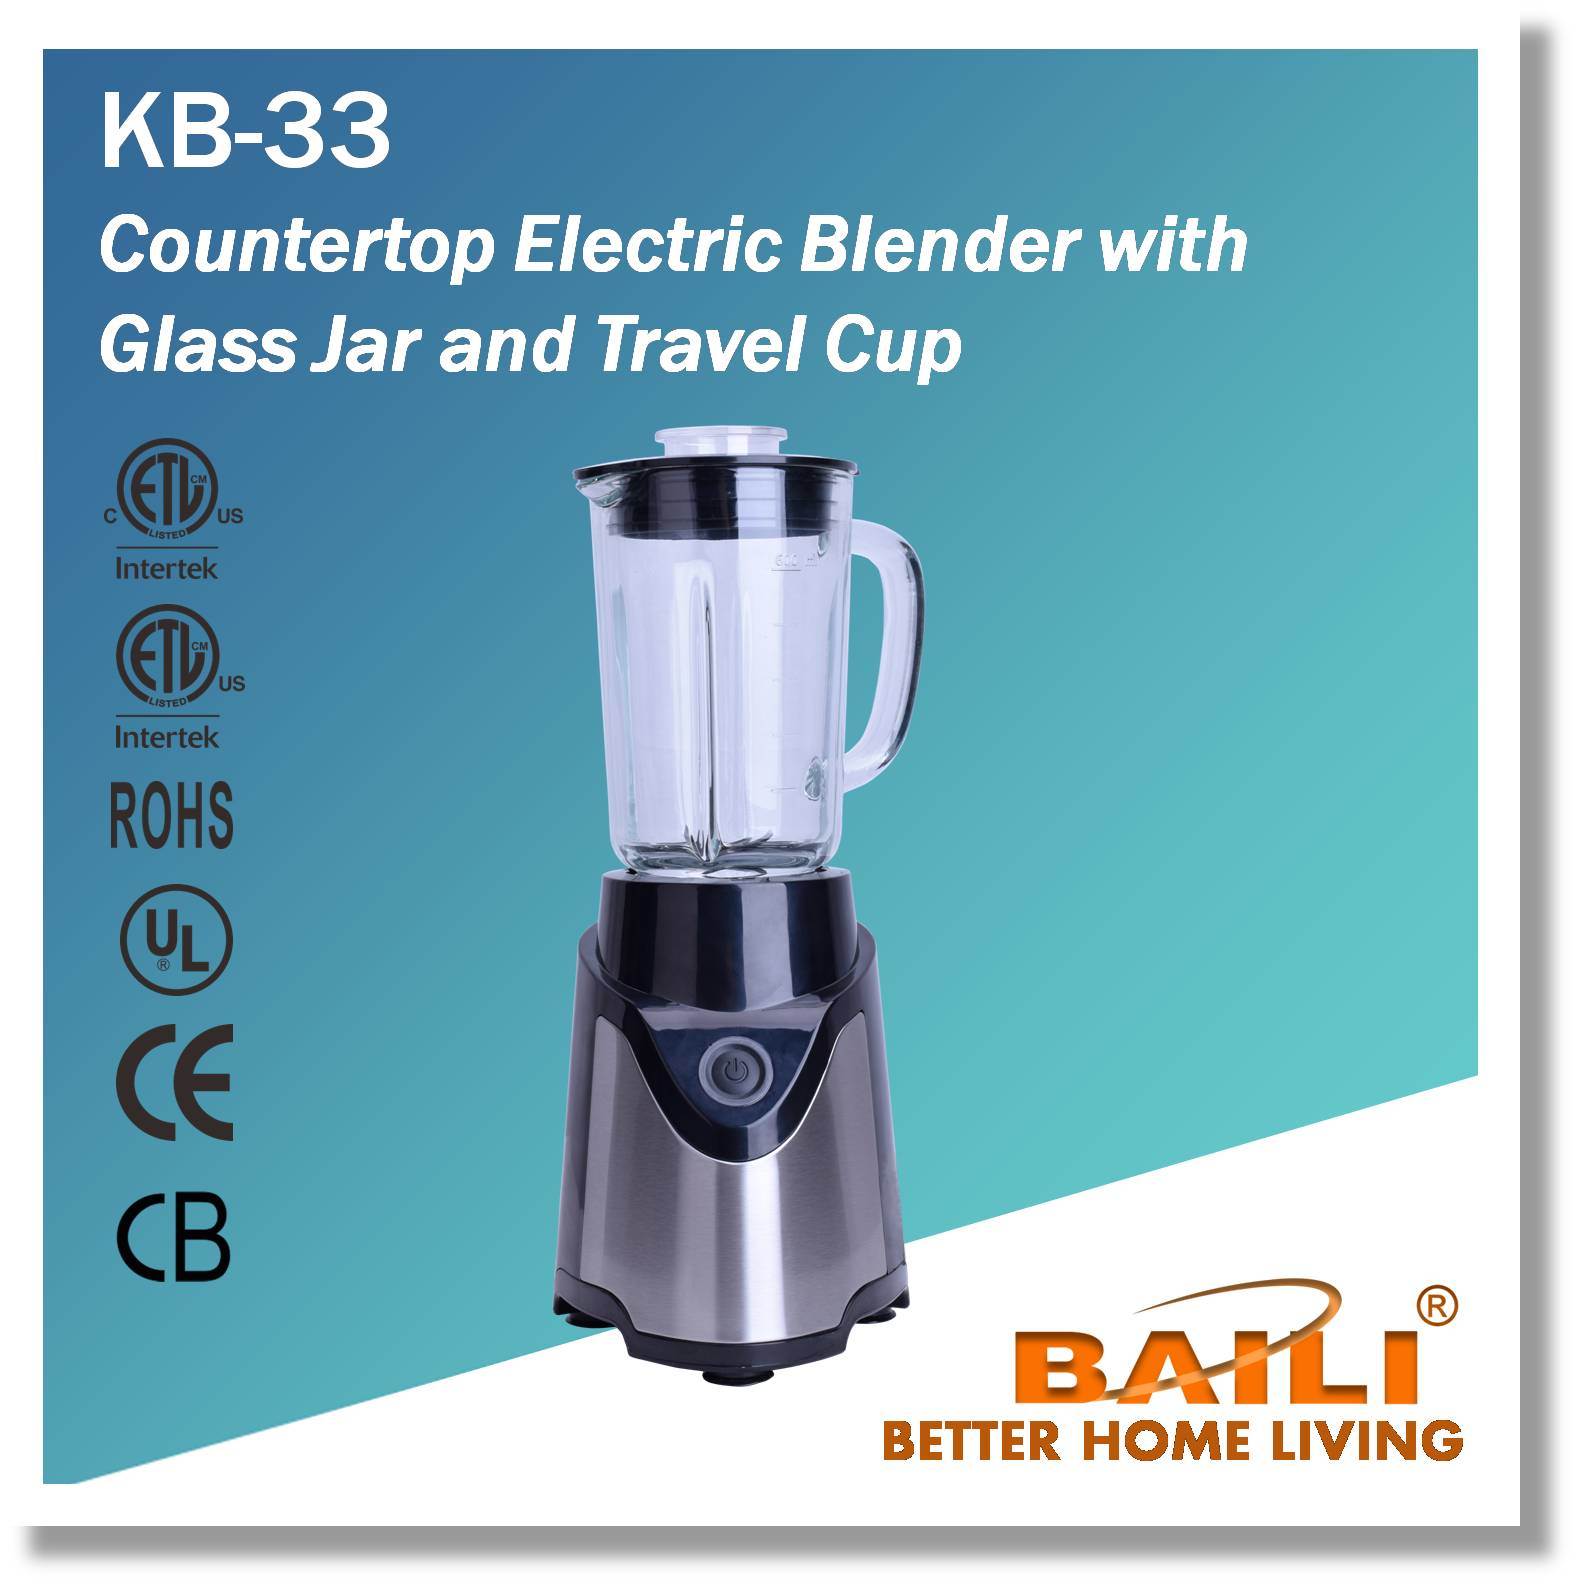 /proimages/2f0j00zwrTHmhonbqW/countertop-electric-blender-with-glass-jar-and-travel-cup.jpg